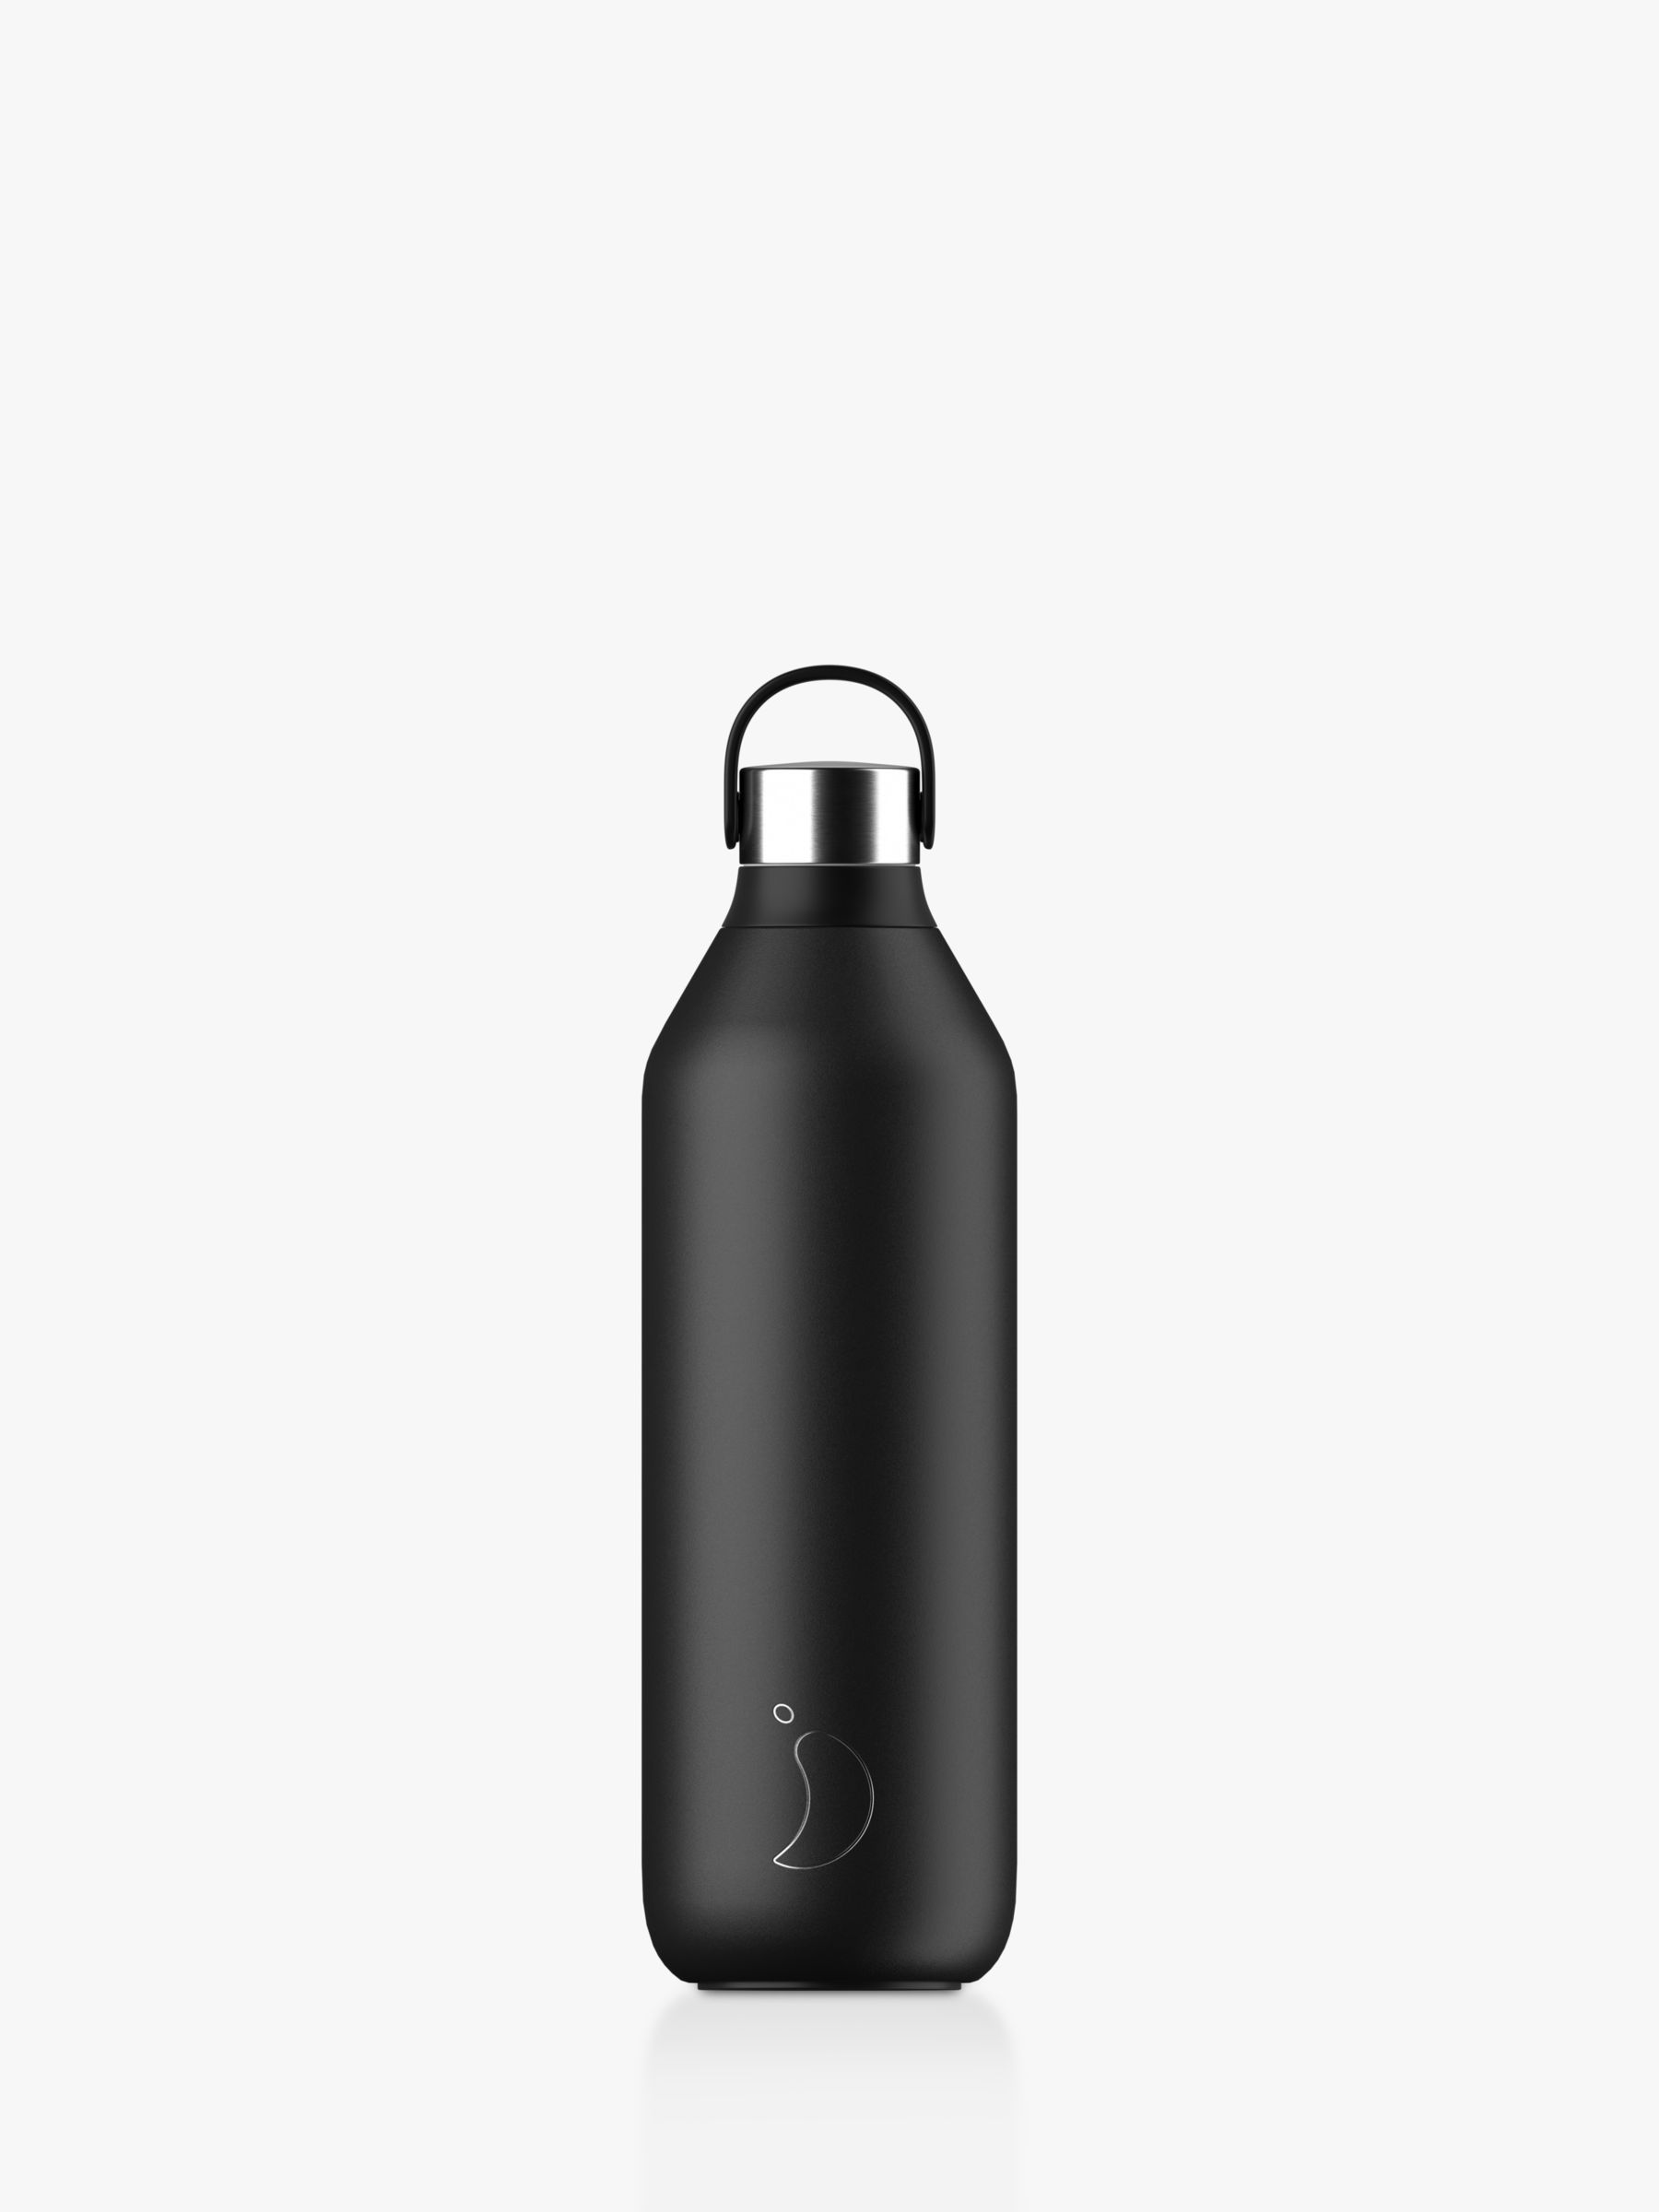 Chilly's Series 2 Insulated Leak-Proof Drinks Bottle, 1L, Black